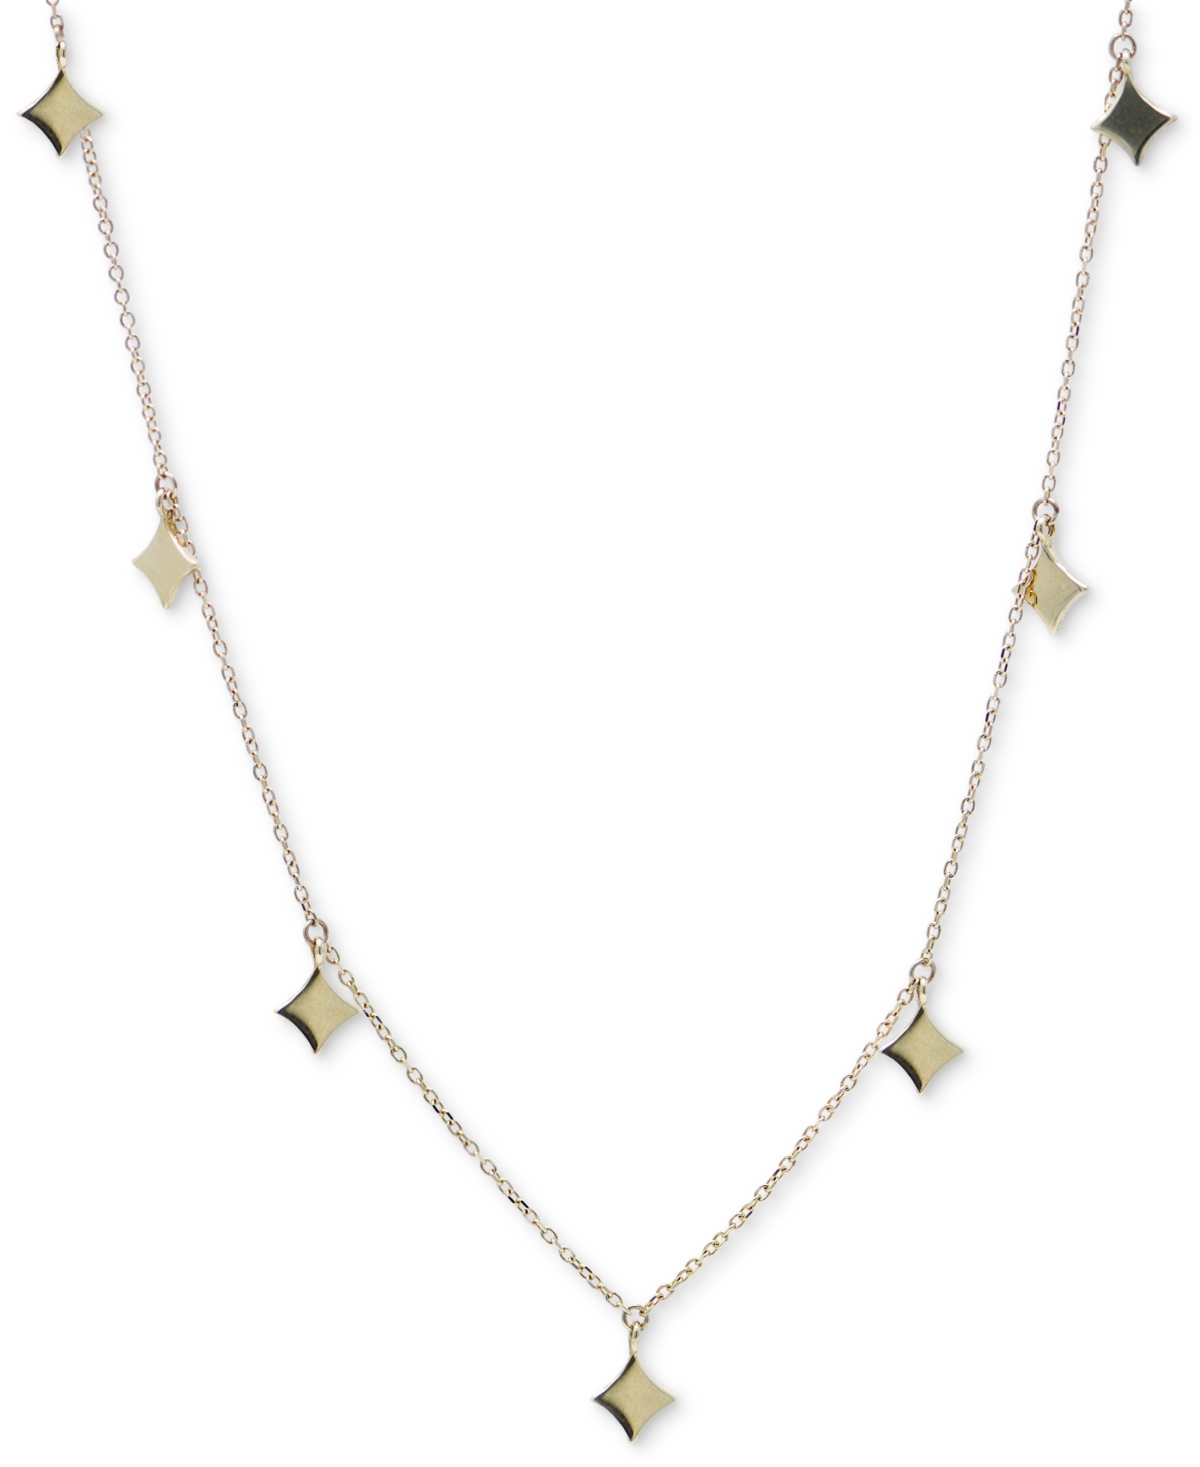 Polished Geometric Dangle Pendant Necklace in 14k Gold, 15" + 1" extender - Gold